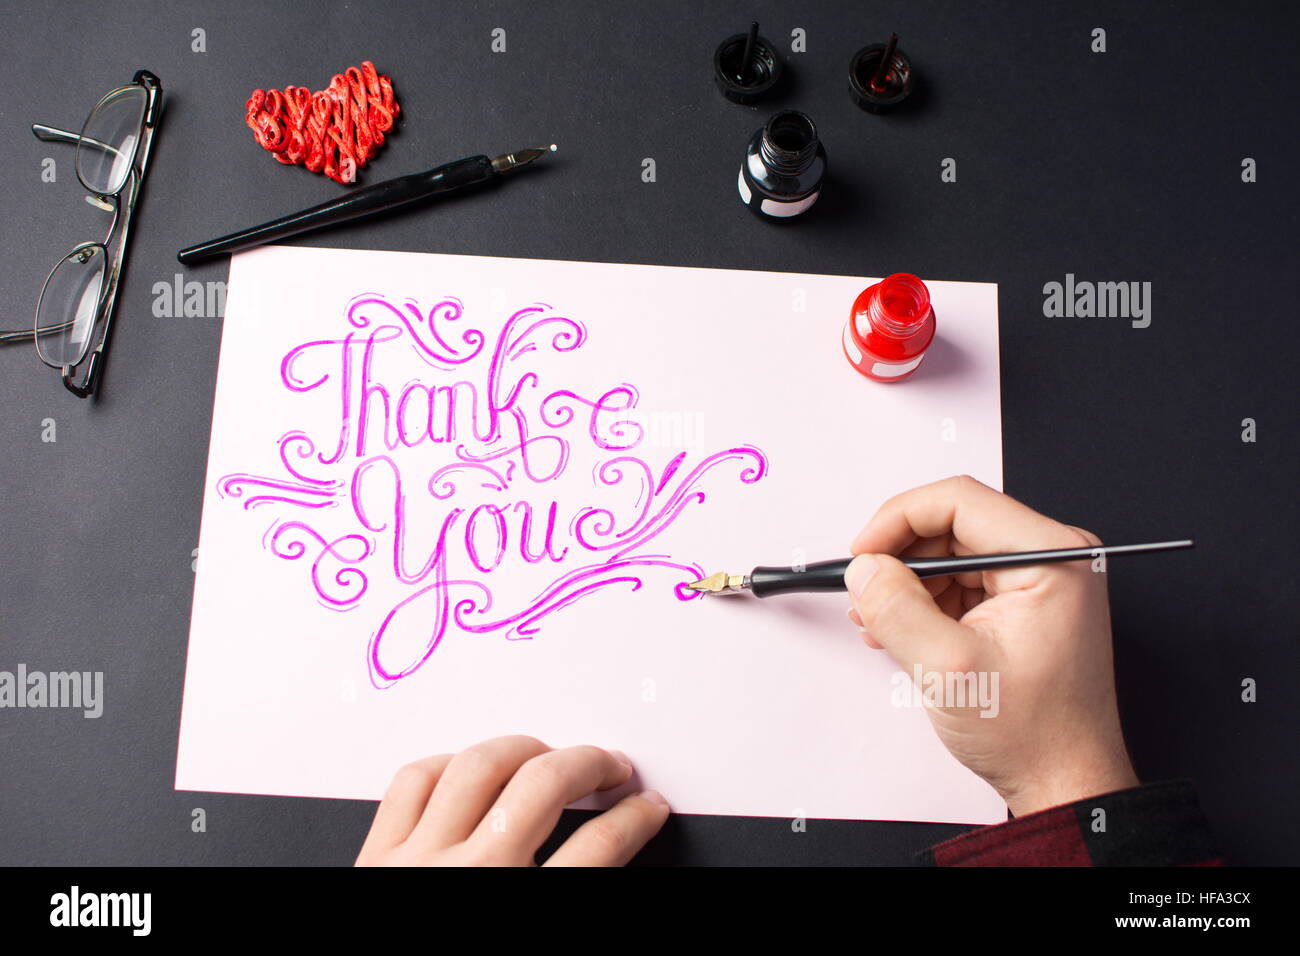 Man writing a Thank you note calligraphy Stock Photo